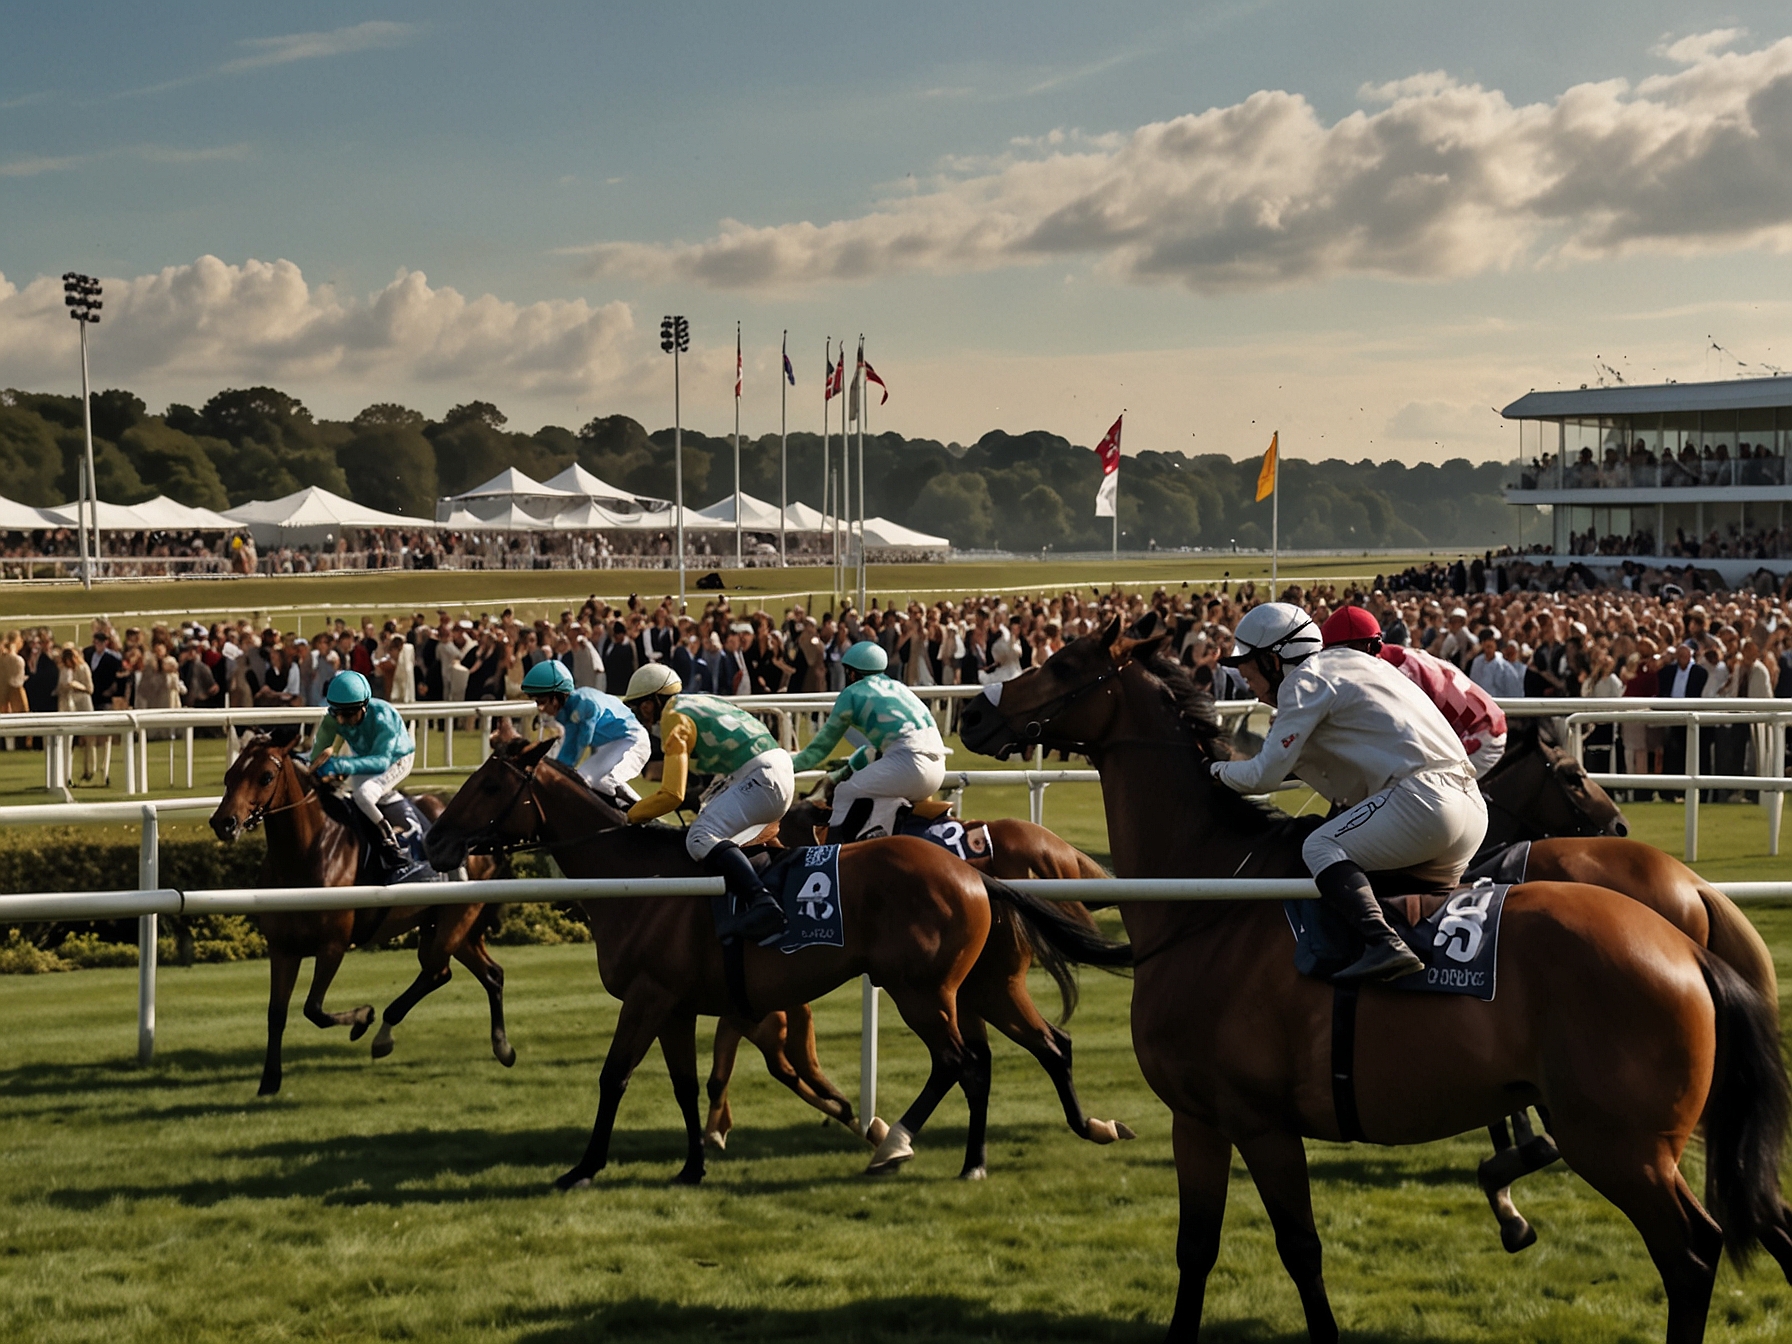 An image depicting a thrilling horse race at the Qatar Goodwood Festival with spectators in stylish attire cheering from the sidelines against the stunning Sussex Downs.